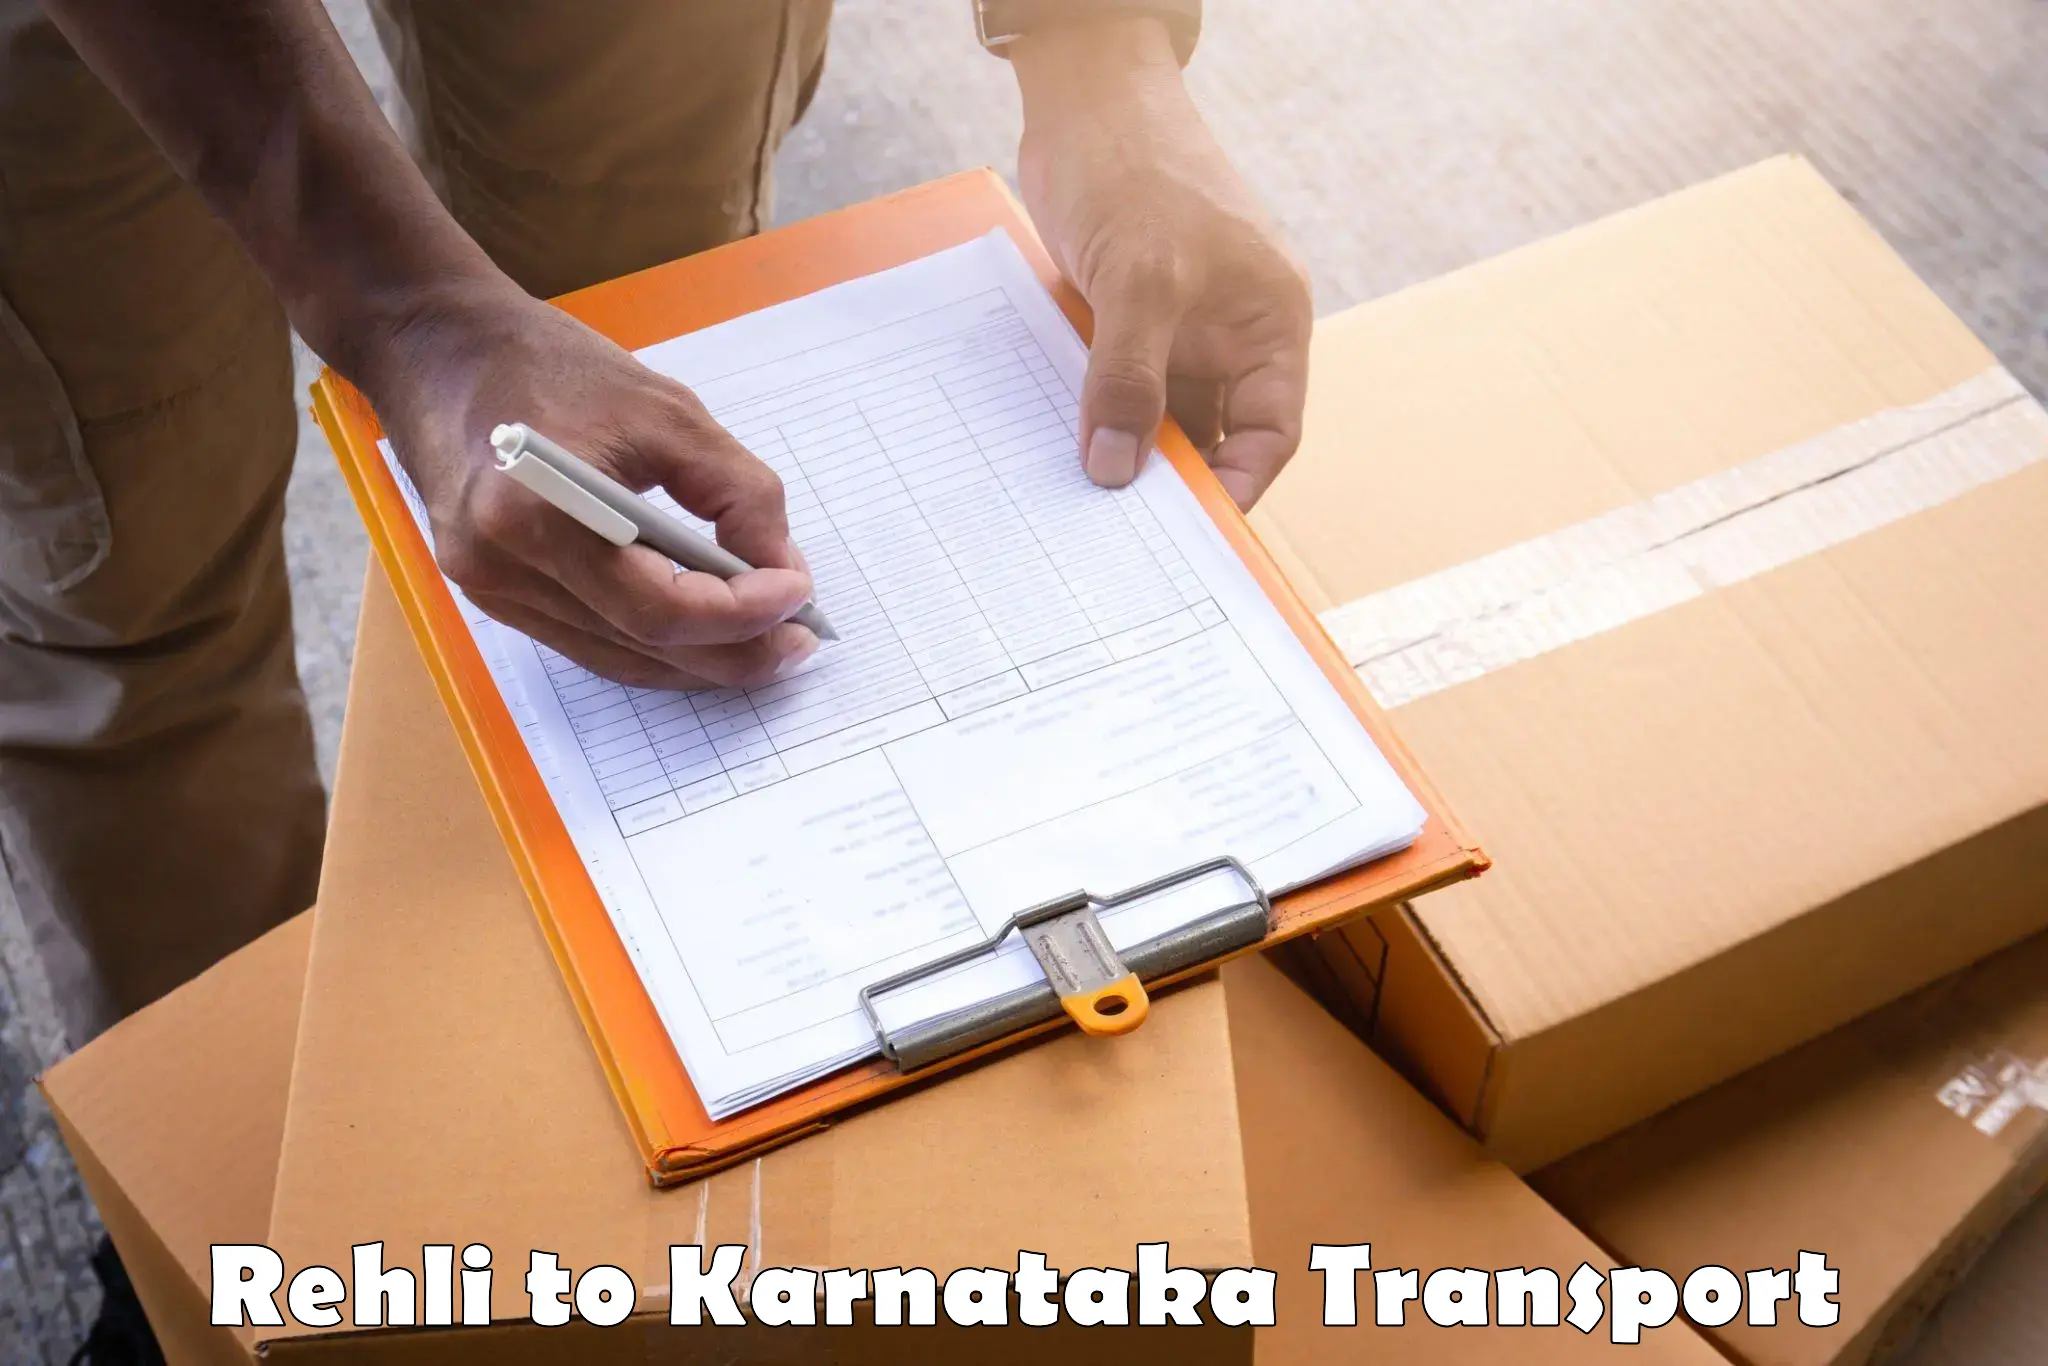 Transport bike from one state to another Rehli to Karnataka